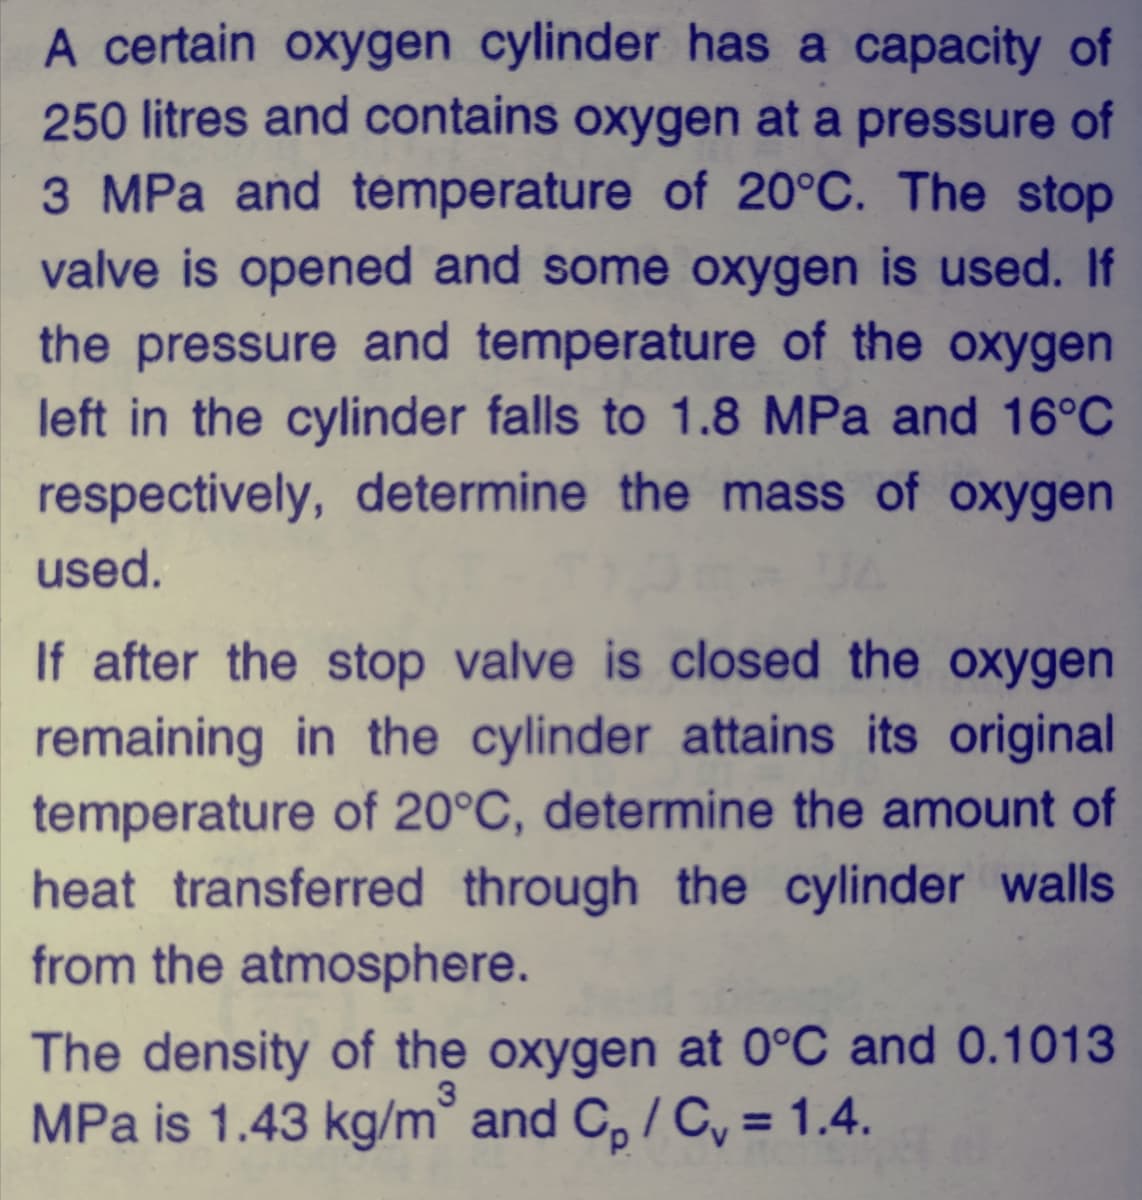 A certain oxygen cylinder has a capacity of
250 litres and contains oxygen at a pressure of
3 MPa and temperature of 20°C. The stop
valve is opened and some oxygen is used. If
the pressure and temperature of the oxygen
left in the cylinder falls to 1.8 MPa and 16°C
respectively, determine the mass of oxygen
used.
If after the stop valve is closed the oxygen
remaining in the cylinder attains its original
temperature of 20°C, determine the amount of
heat transferred through the cylinder walls
from the atmosphere.
The density of the oxygen at 0°C and 0.1013
MPa is 1.43 kg/m° and C, / C, = 1.4.
3.
%3D
